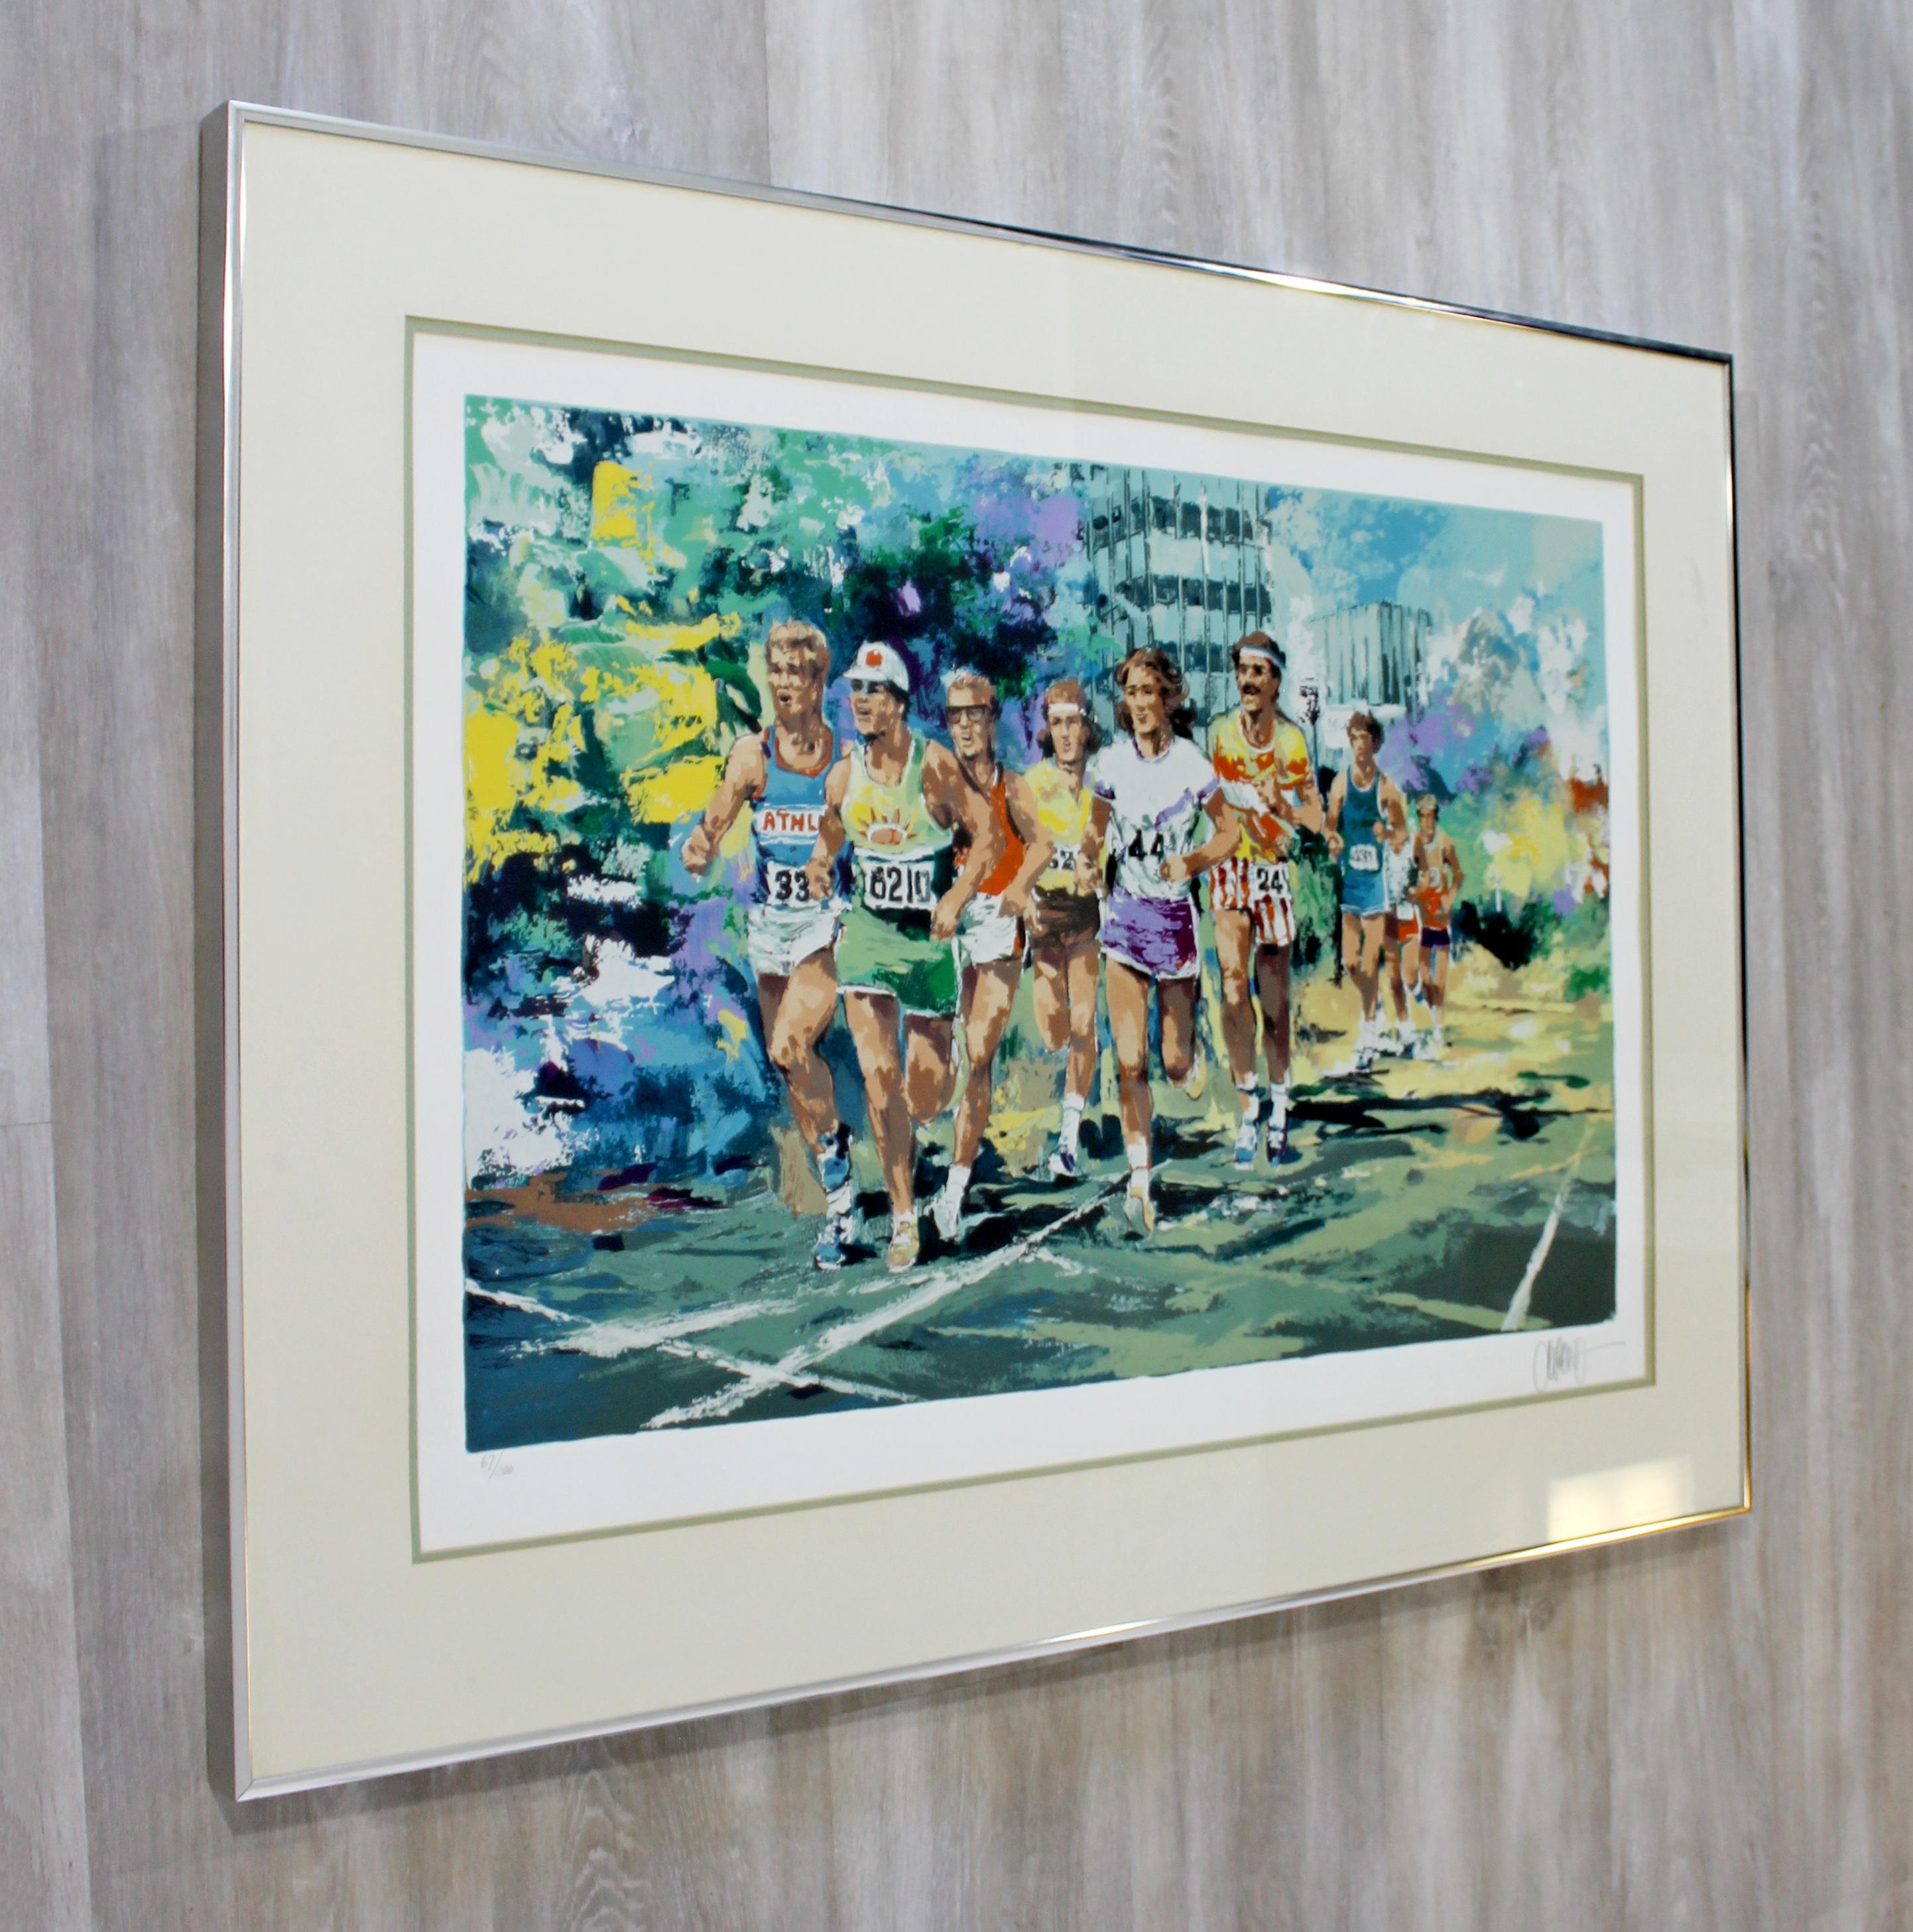 For your consideration is a vibrant, framed serigraph, entitled 